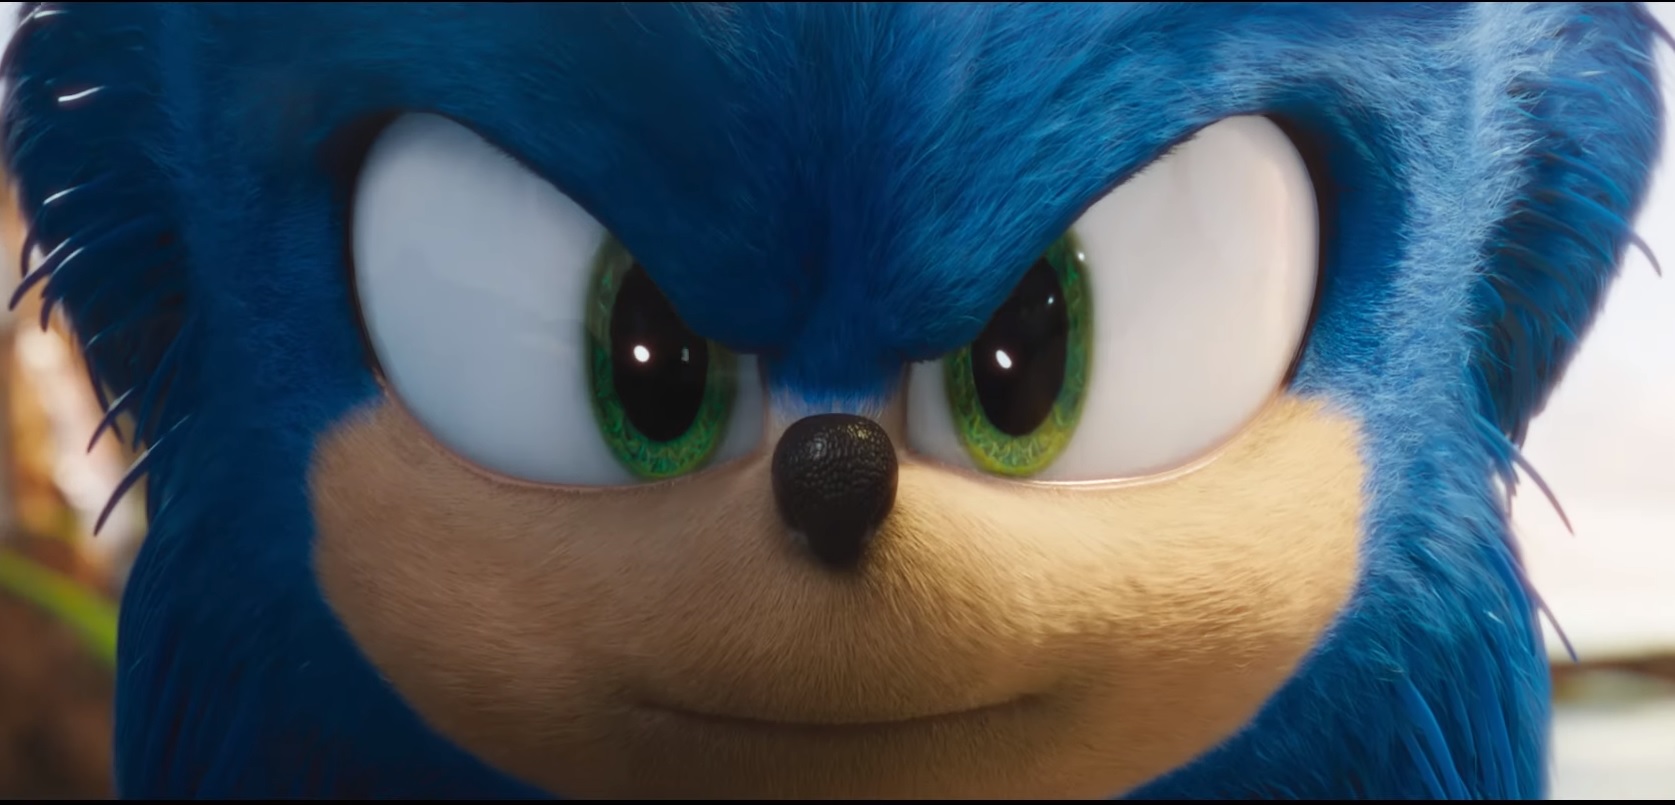  Sonic the Hedgehog 2 now the highest-grossing videogame movie ever in the US 